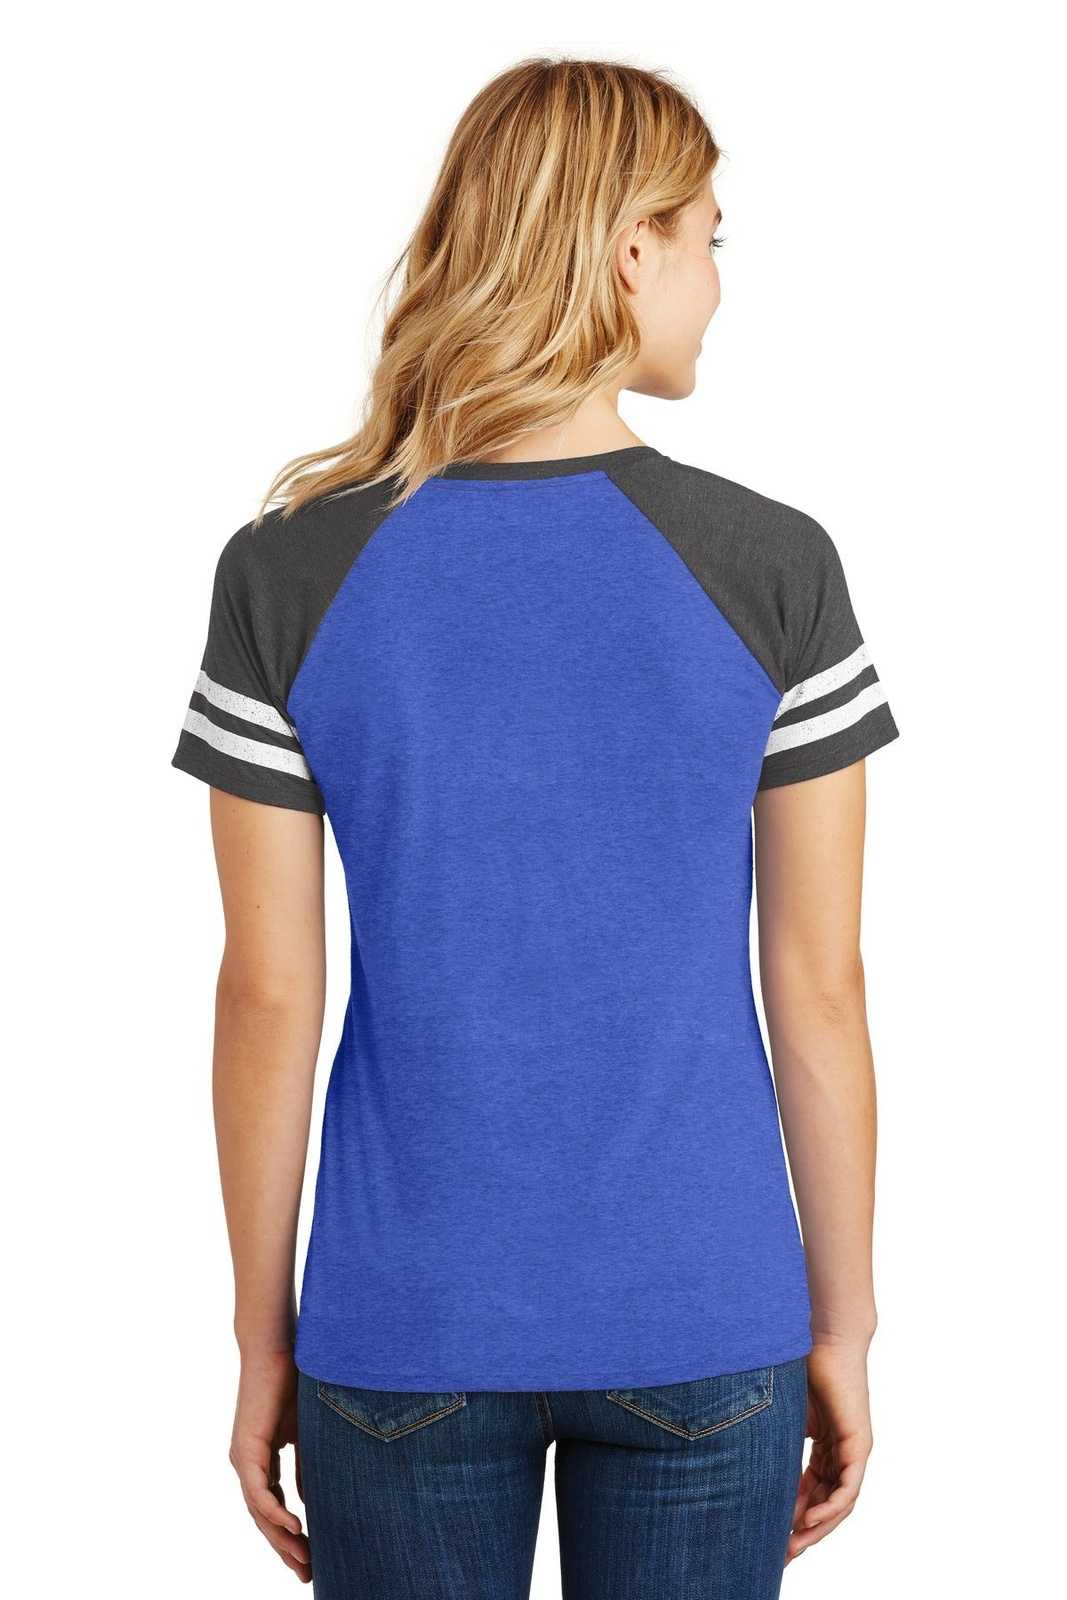 District DM476 Women's Game V-Neck Tee - Heathered True Royal Heathered Charcoal - HIT a Double - 1